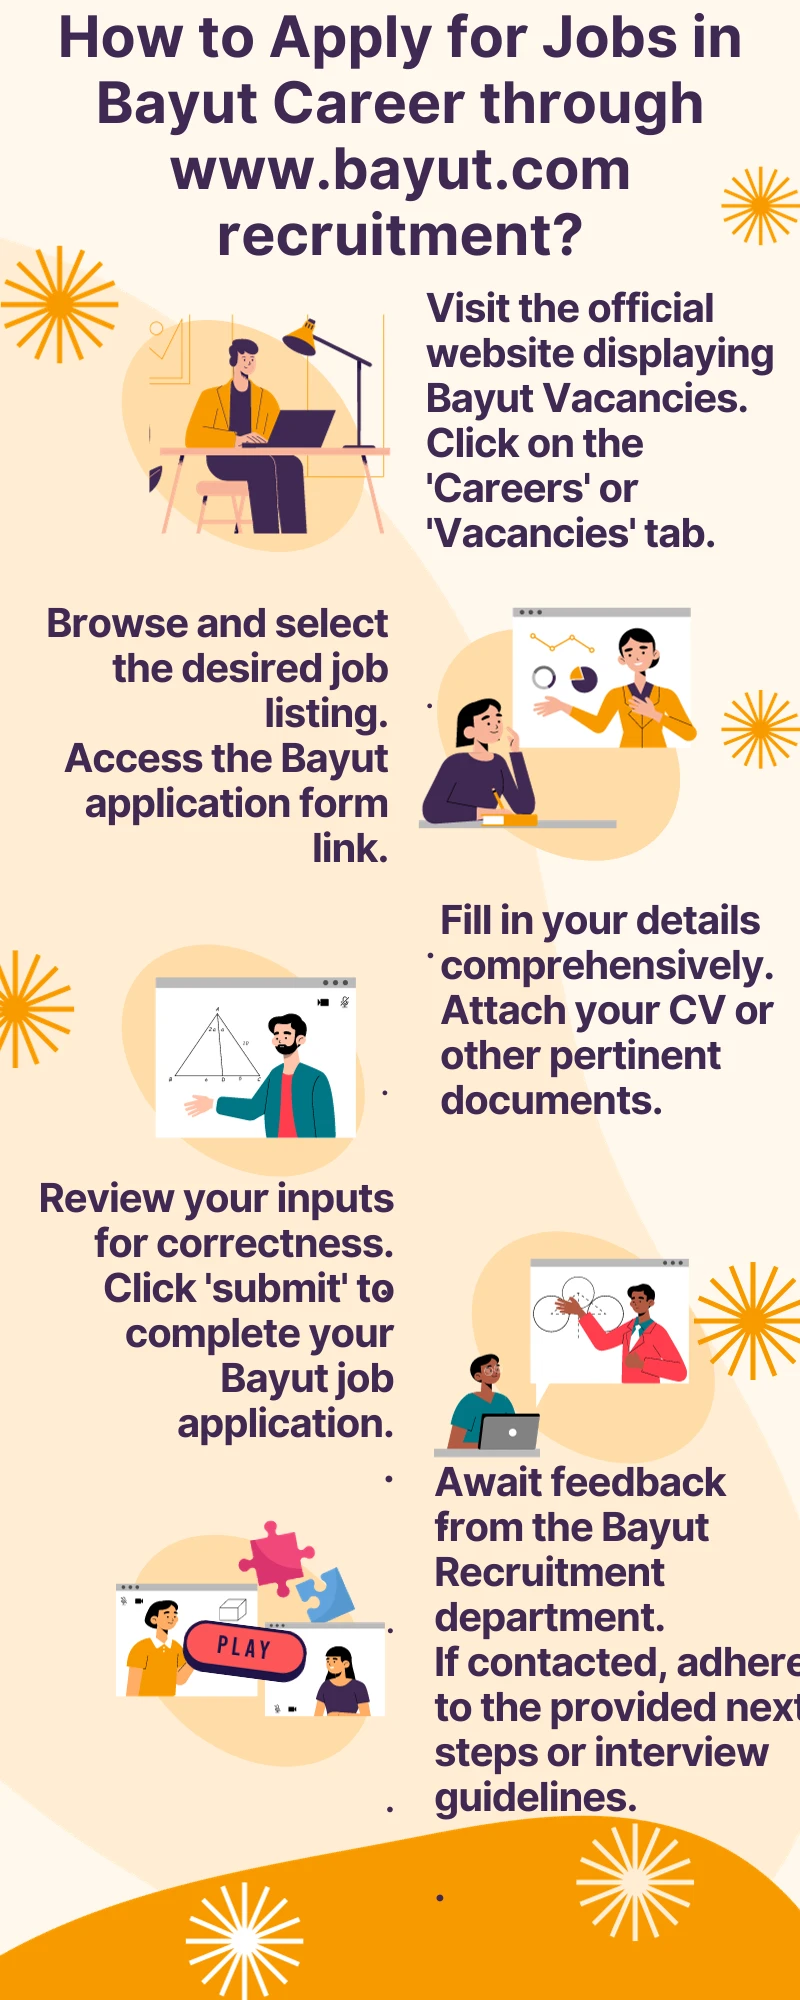 How to Apply for Jobs in Bayut Career through www.bayut.com recruitment?